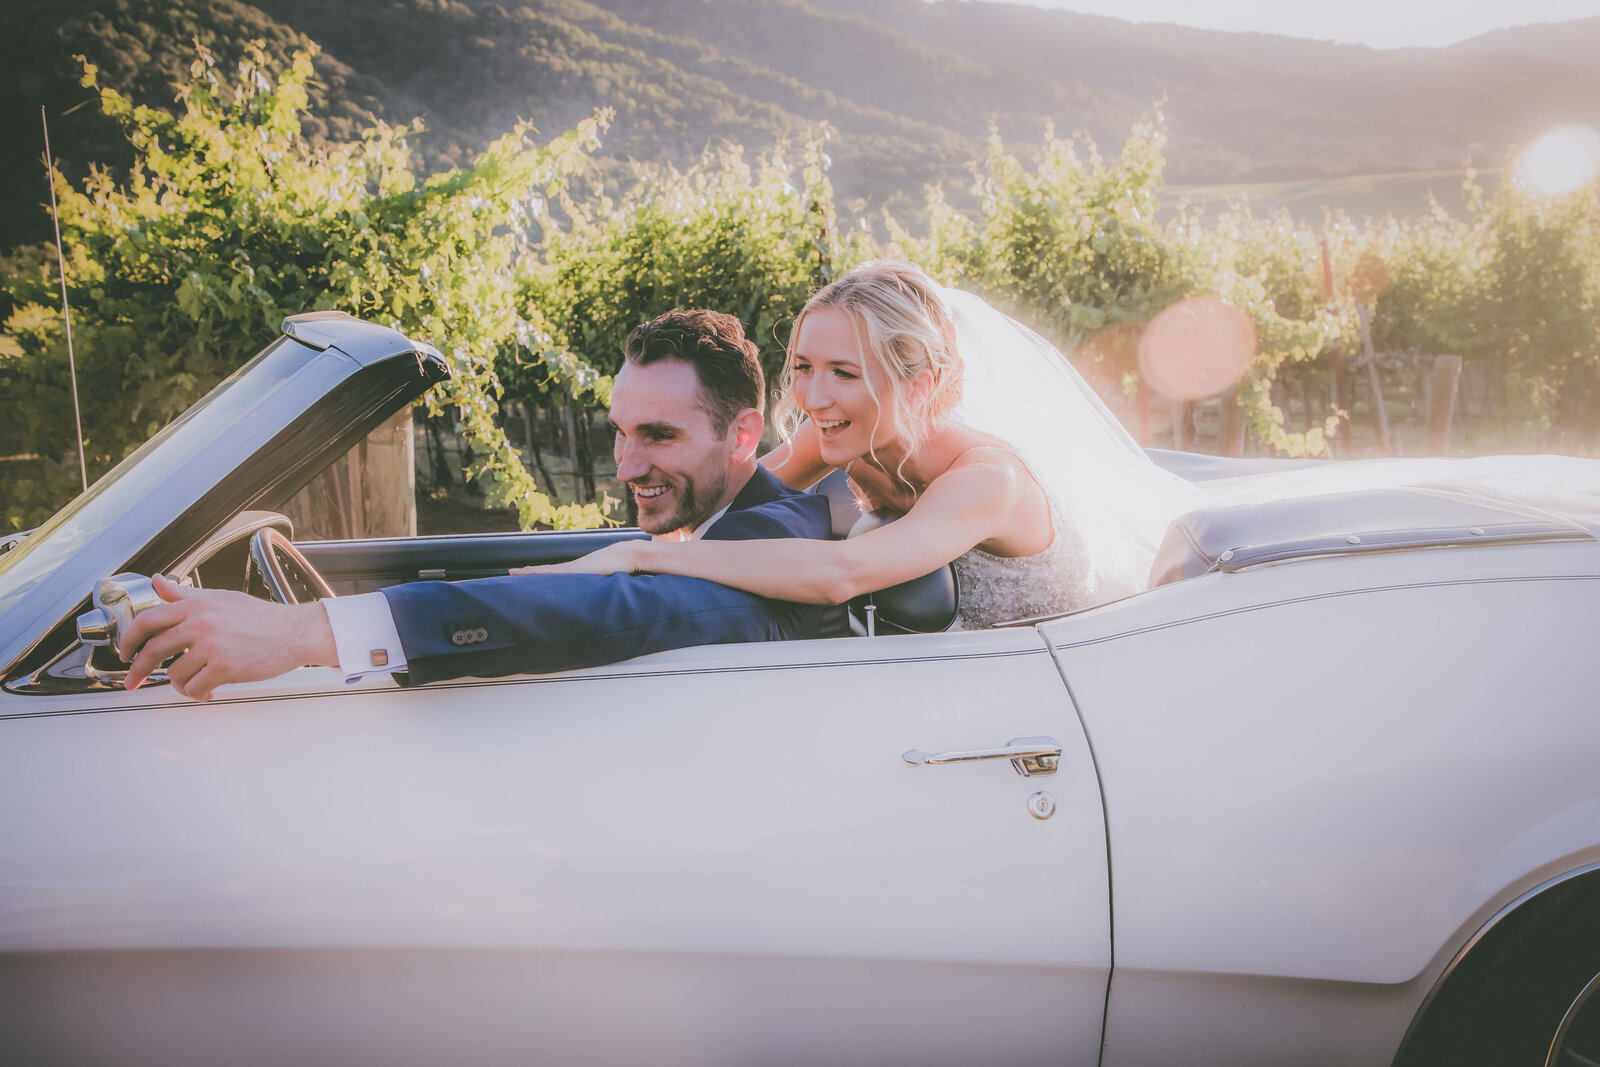 Groom and bride look into car mirror during sunset at a Carmel vineyard.